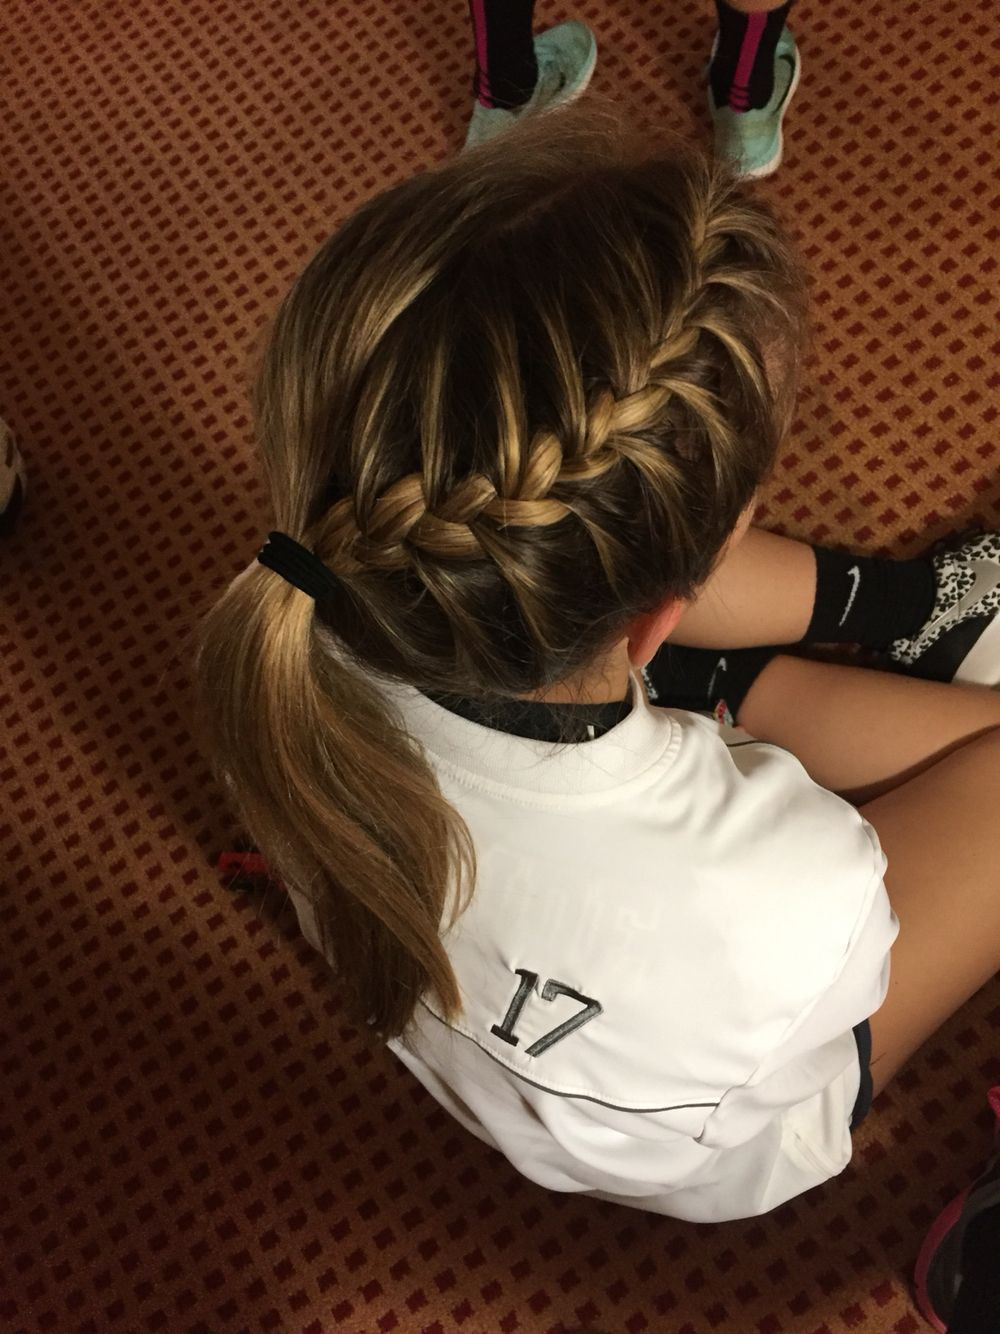 Hairstyles Game For Girls
 Perfect braid for a volleyball game HÀÎŔ